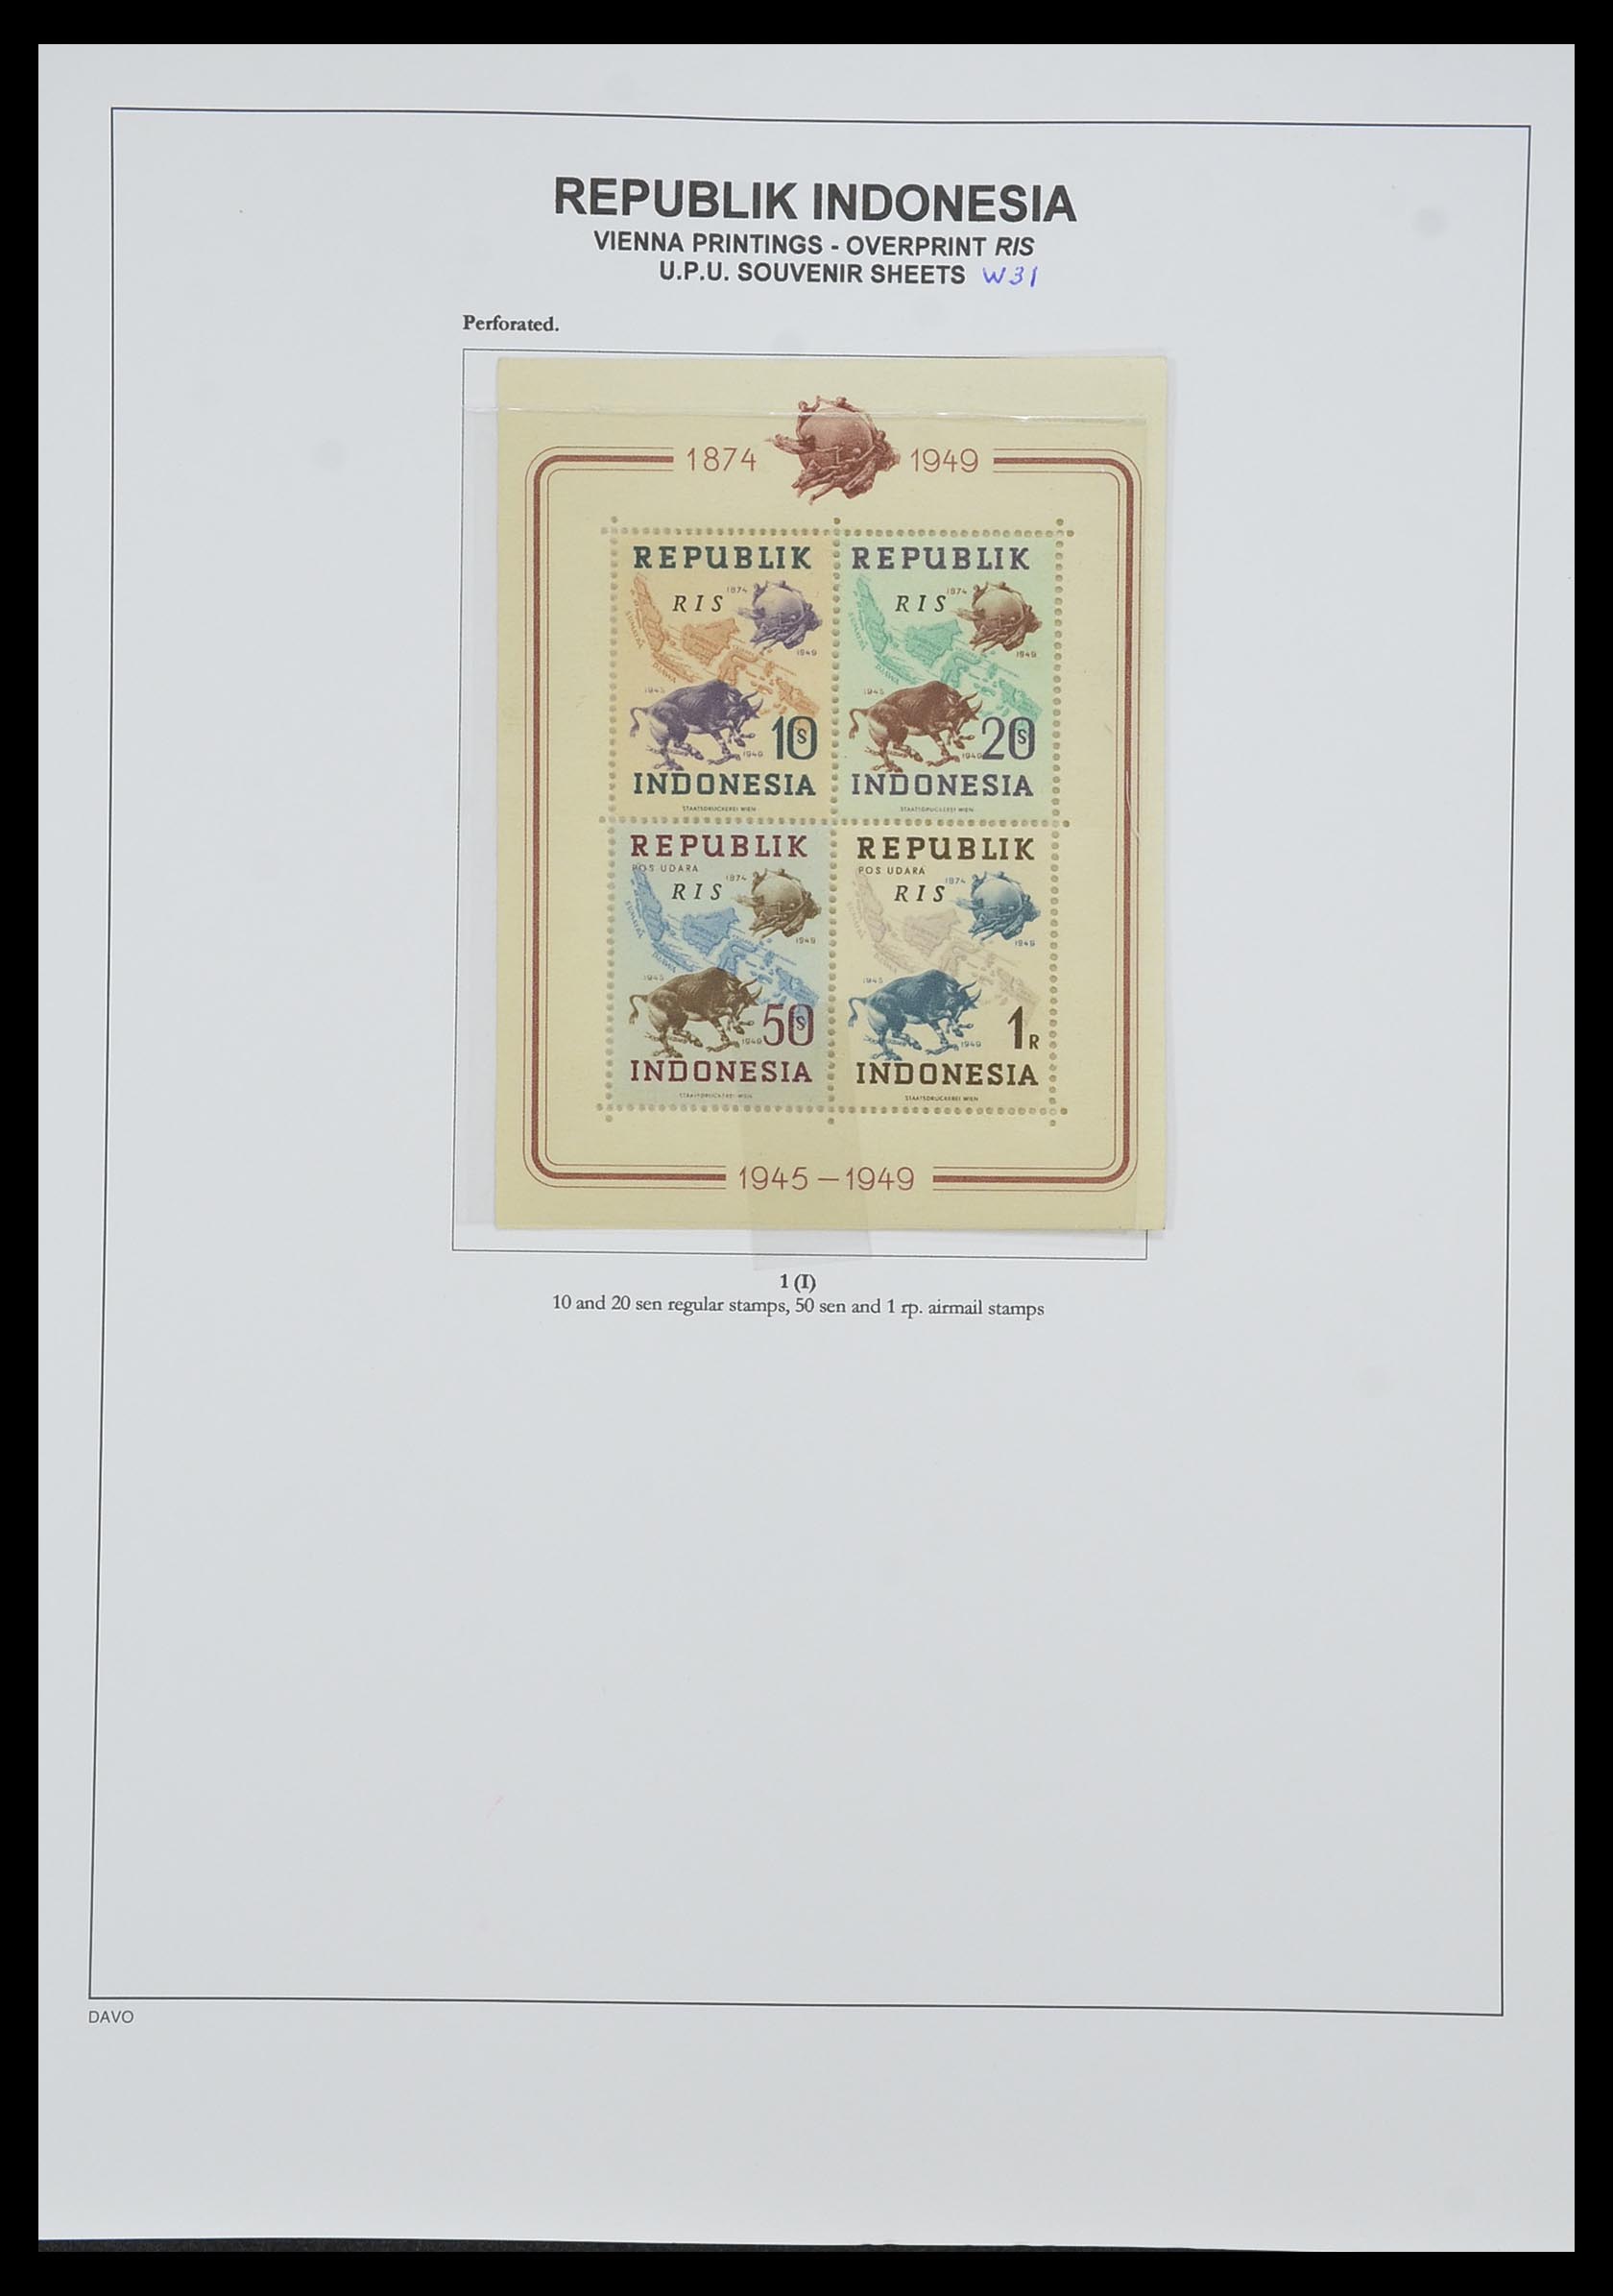 33988 048 - Stamp collection 33988 Vienna printings Indonesia.